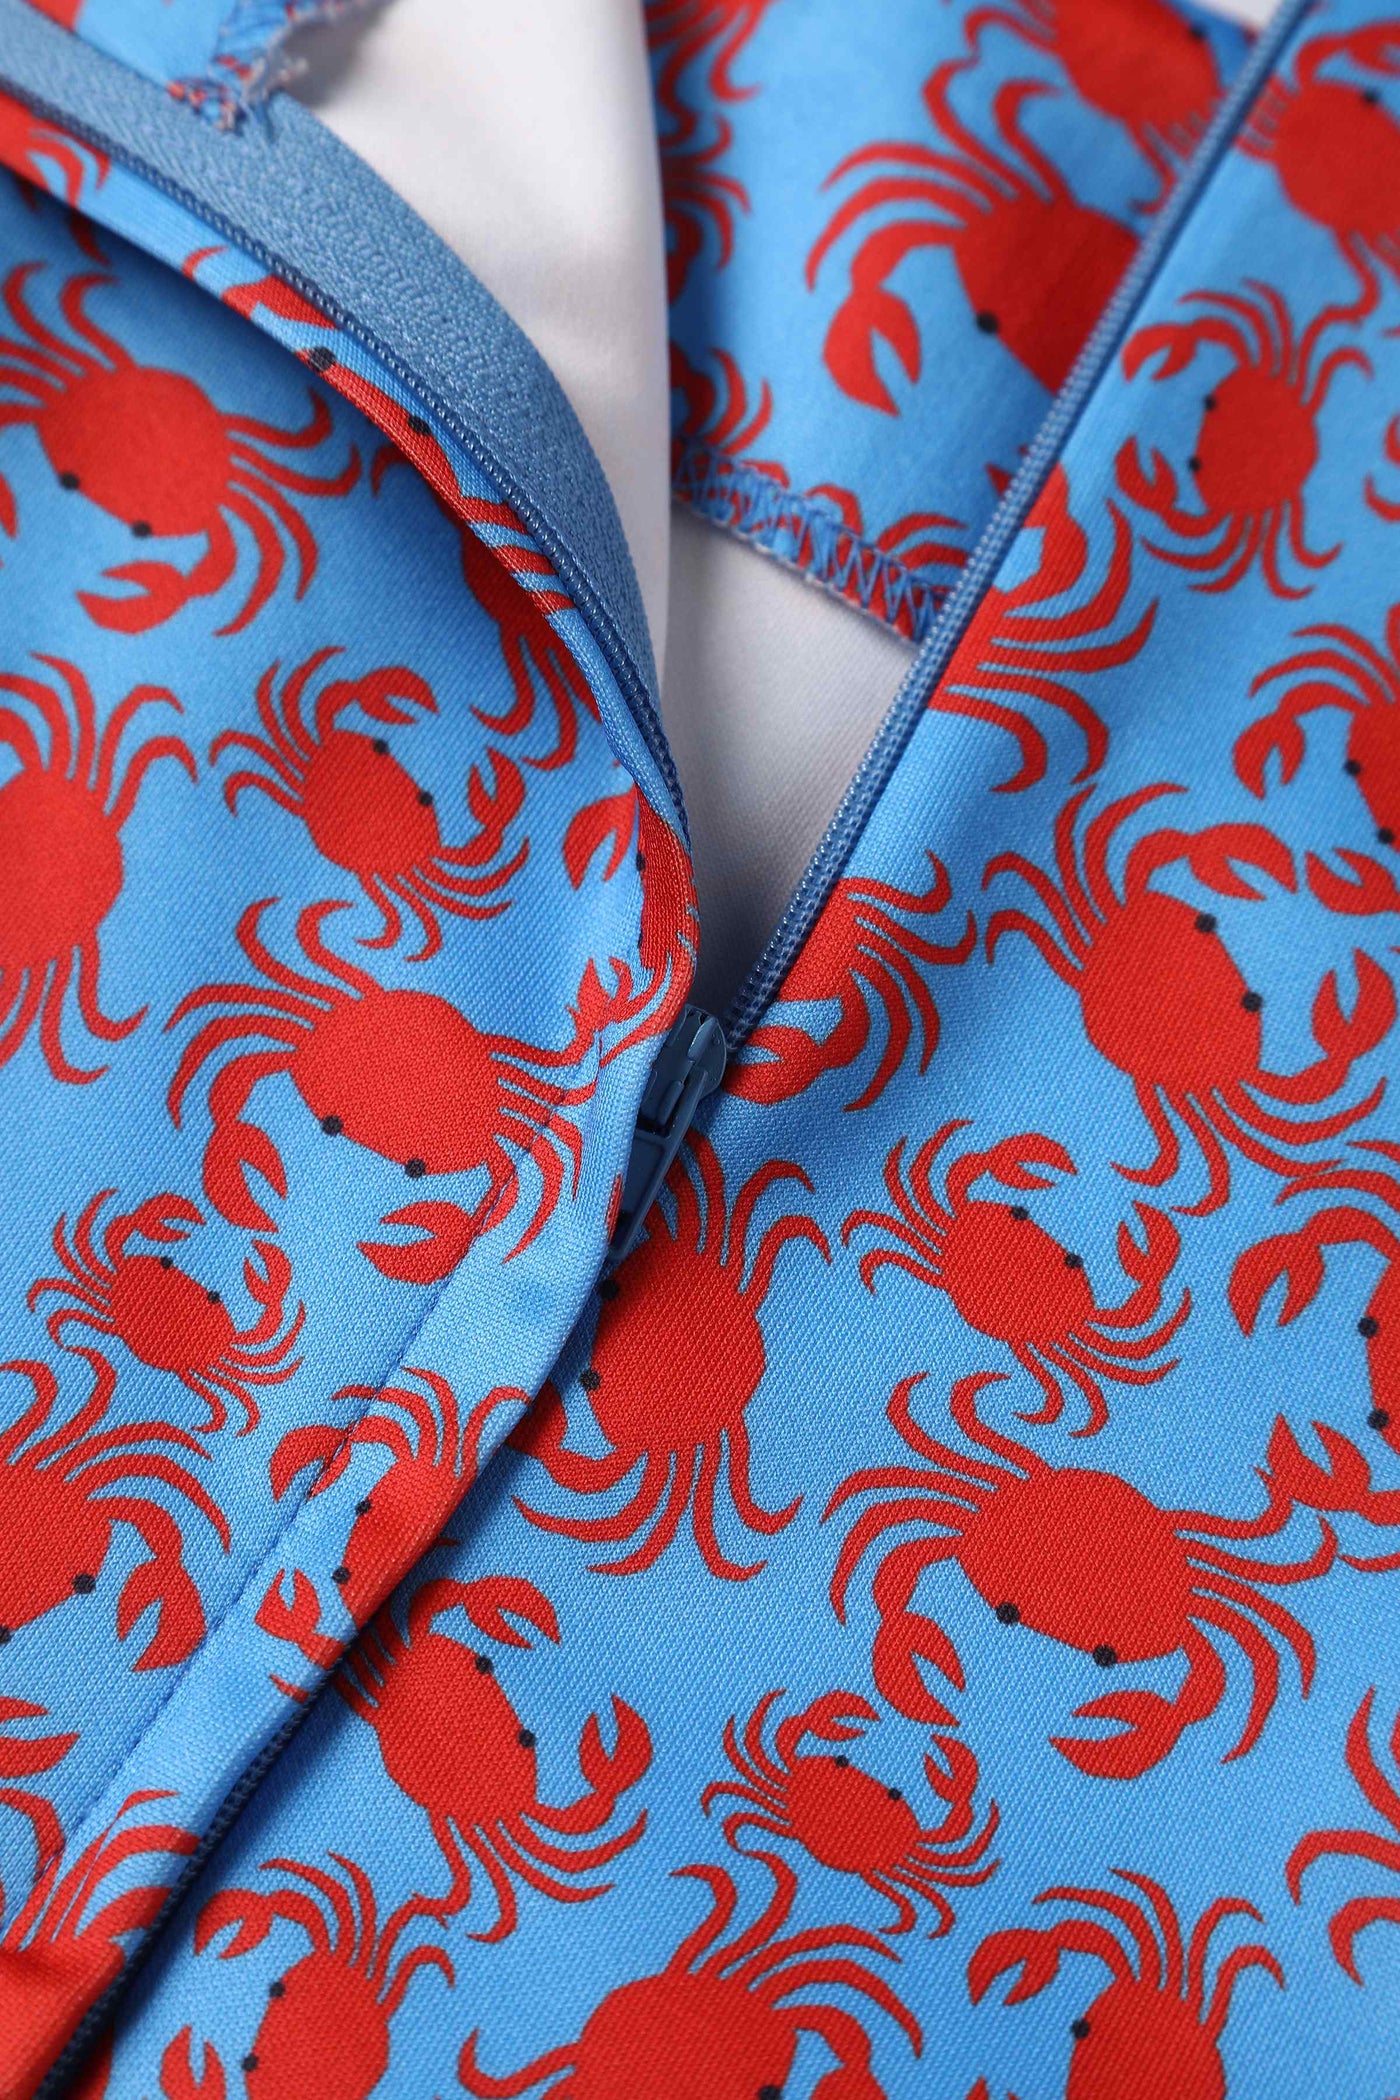 Close up View of Crab Print Swing Dress in blue